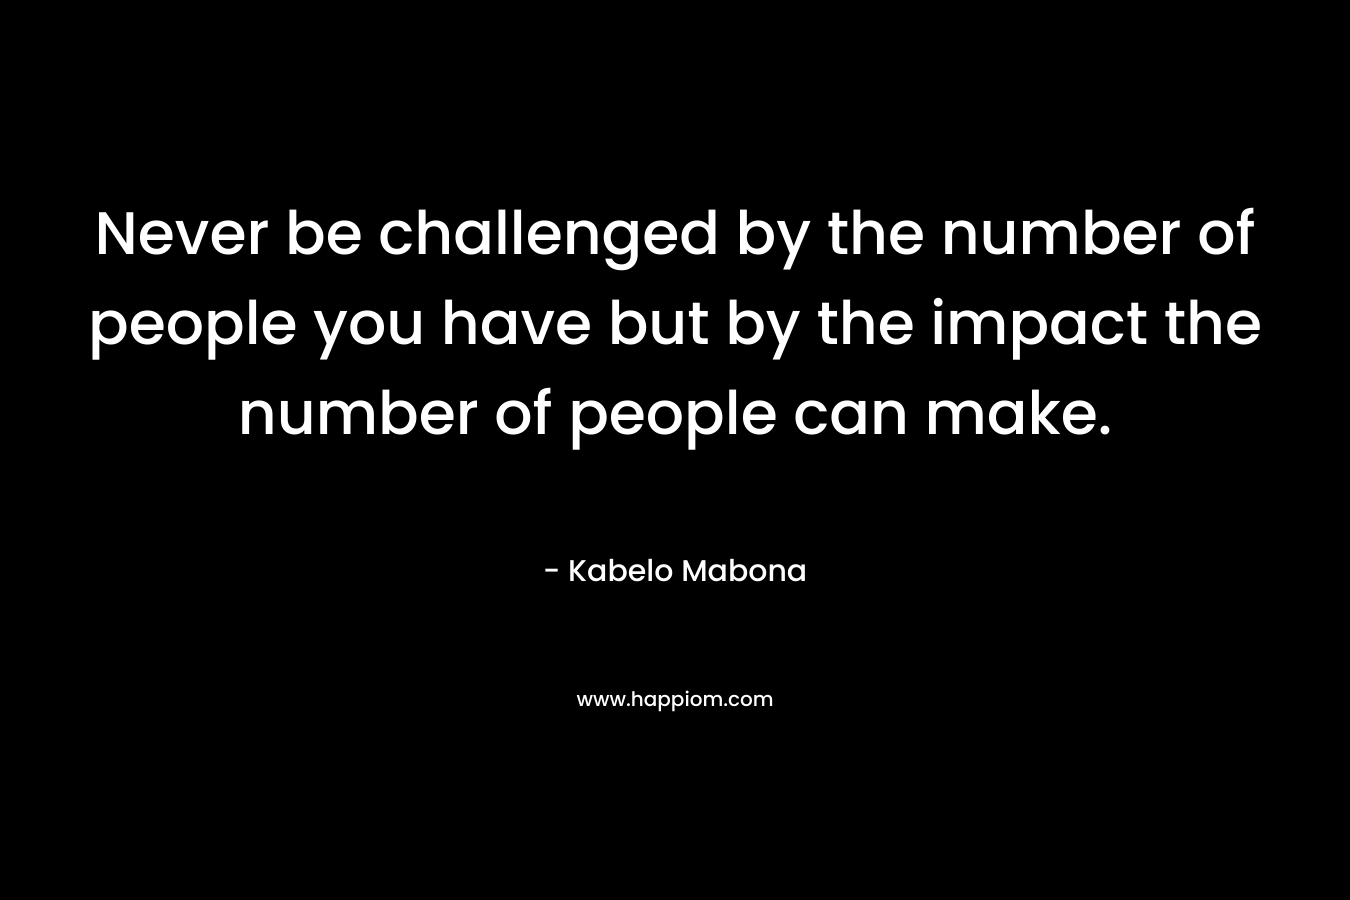 Never be challenged by the number of people you have but by the impact the number of people can make. – Kabelo Mabona